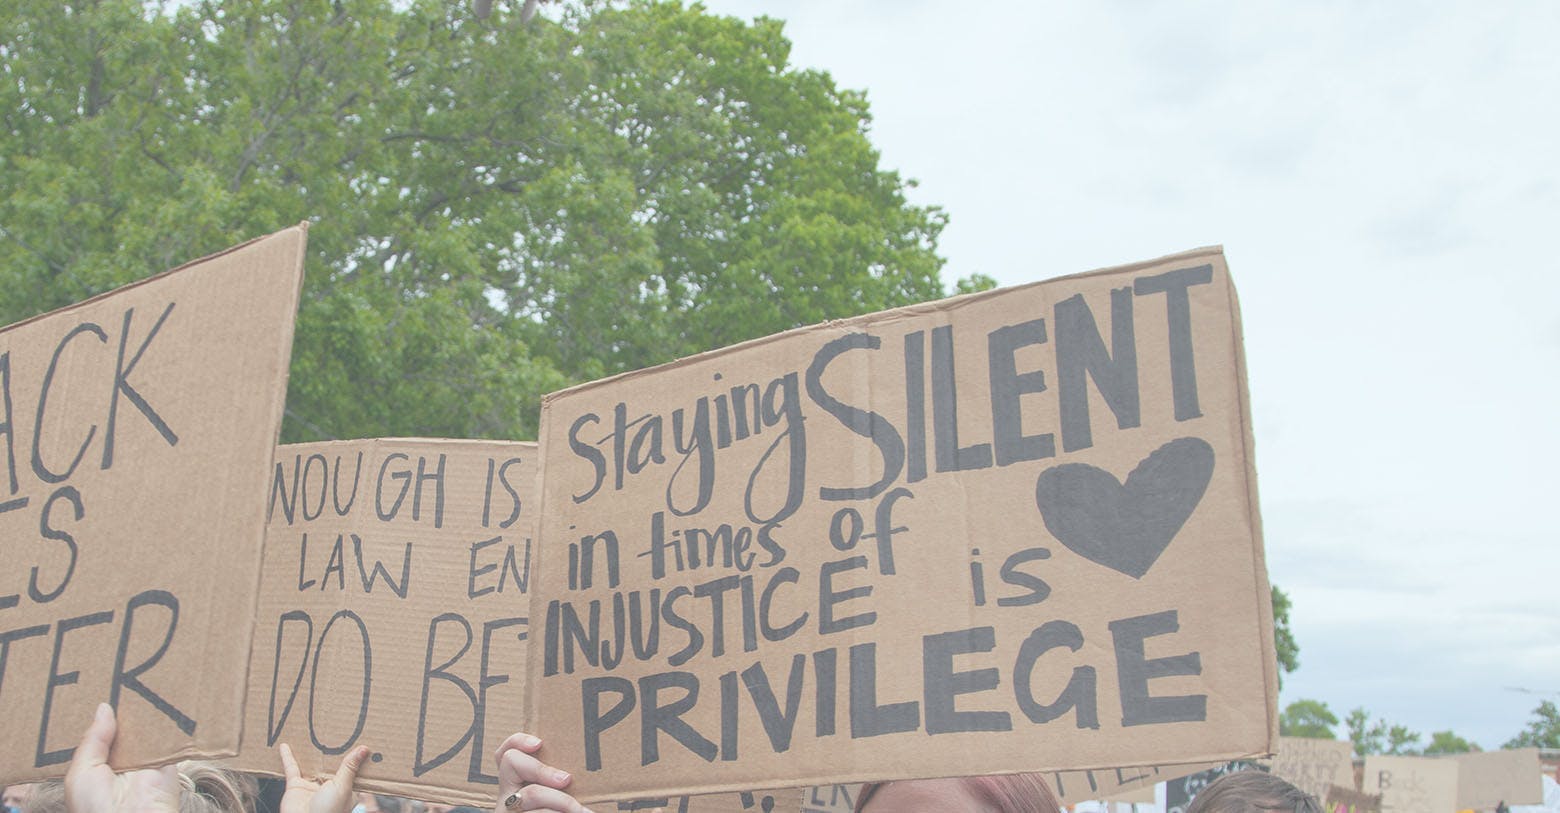 People holding signs at a protest. One sign reads "Staying silent in times of injustice is a privilege". 